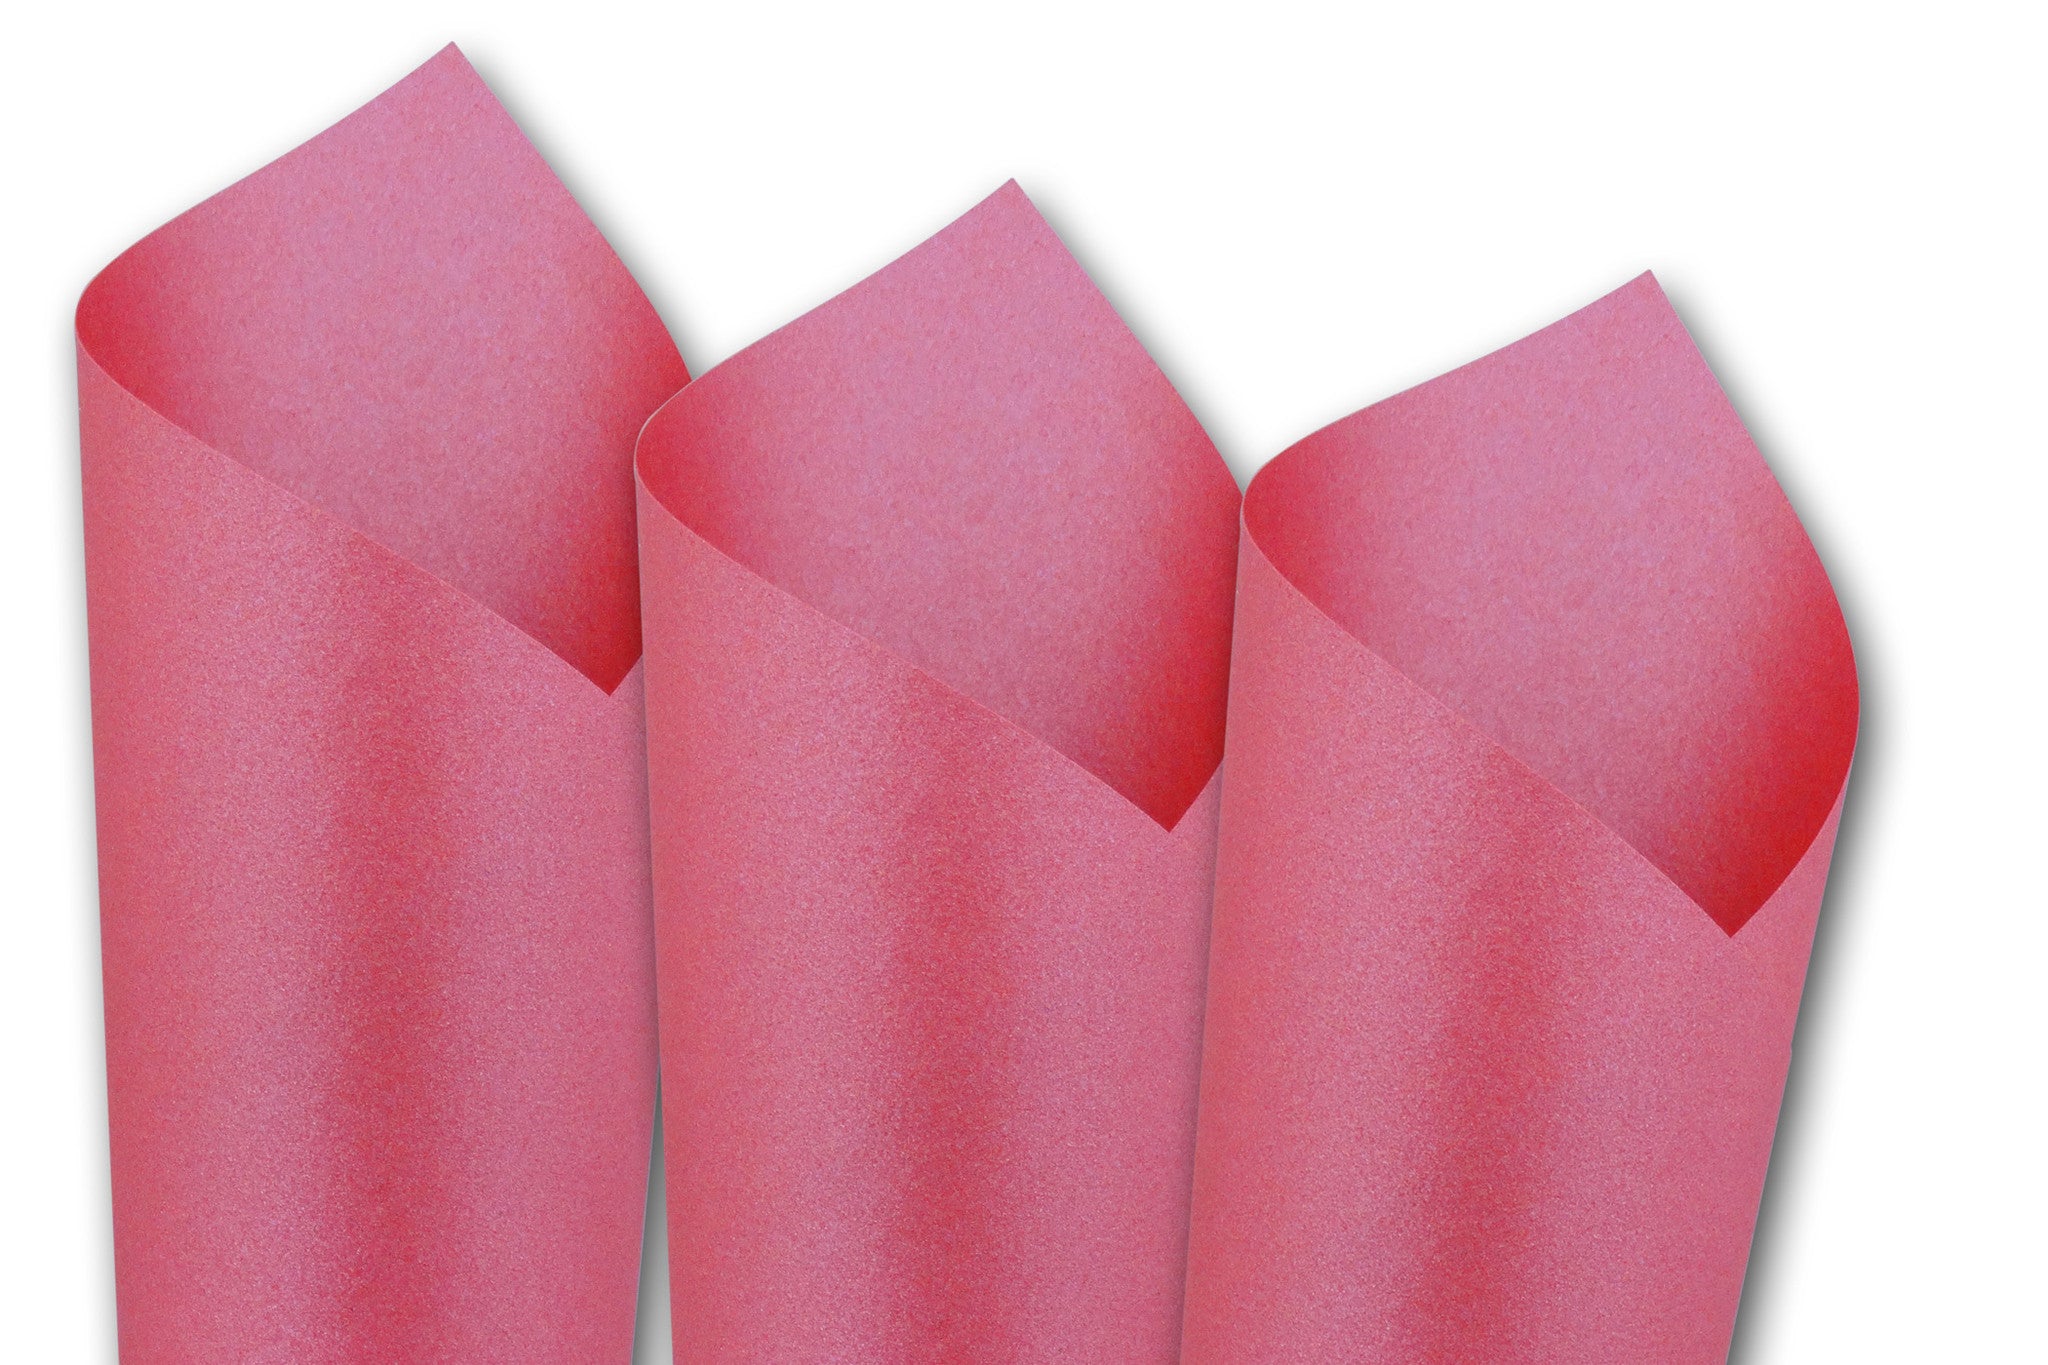 Shimmery Vibrant Pink Card Stock for DIY invitations and Valentines -  CutCardStock